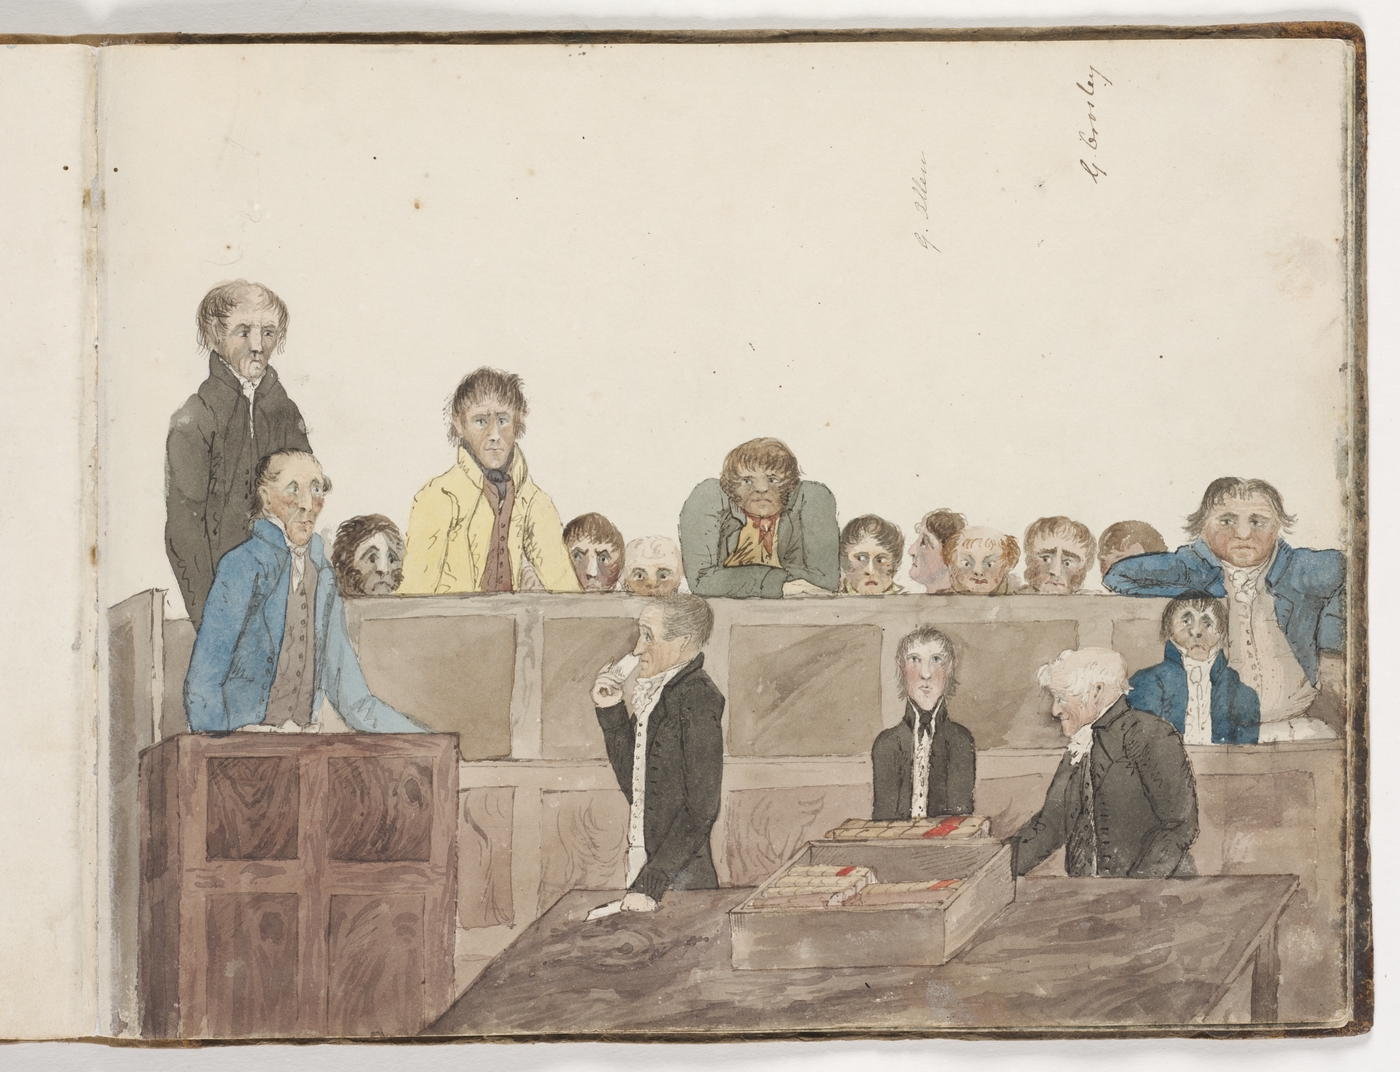 Courtroom scene, Sydney: the ‘Philo Free’ civil libel trial, 1 December 1817 (State Library of NSW, Edward Charles Close - sketchbook of New South Wales views, c. 1817, State Library of NSW, PXA 1187, Digital order no. a2821047)